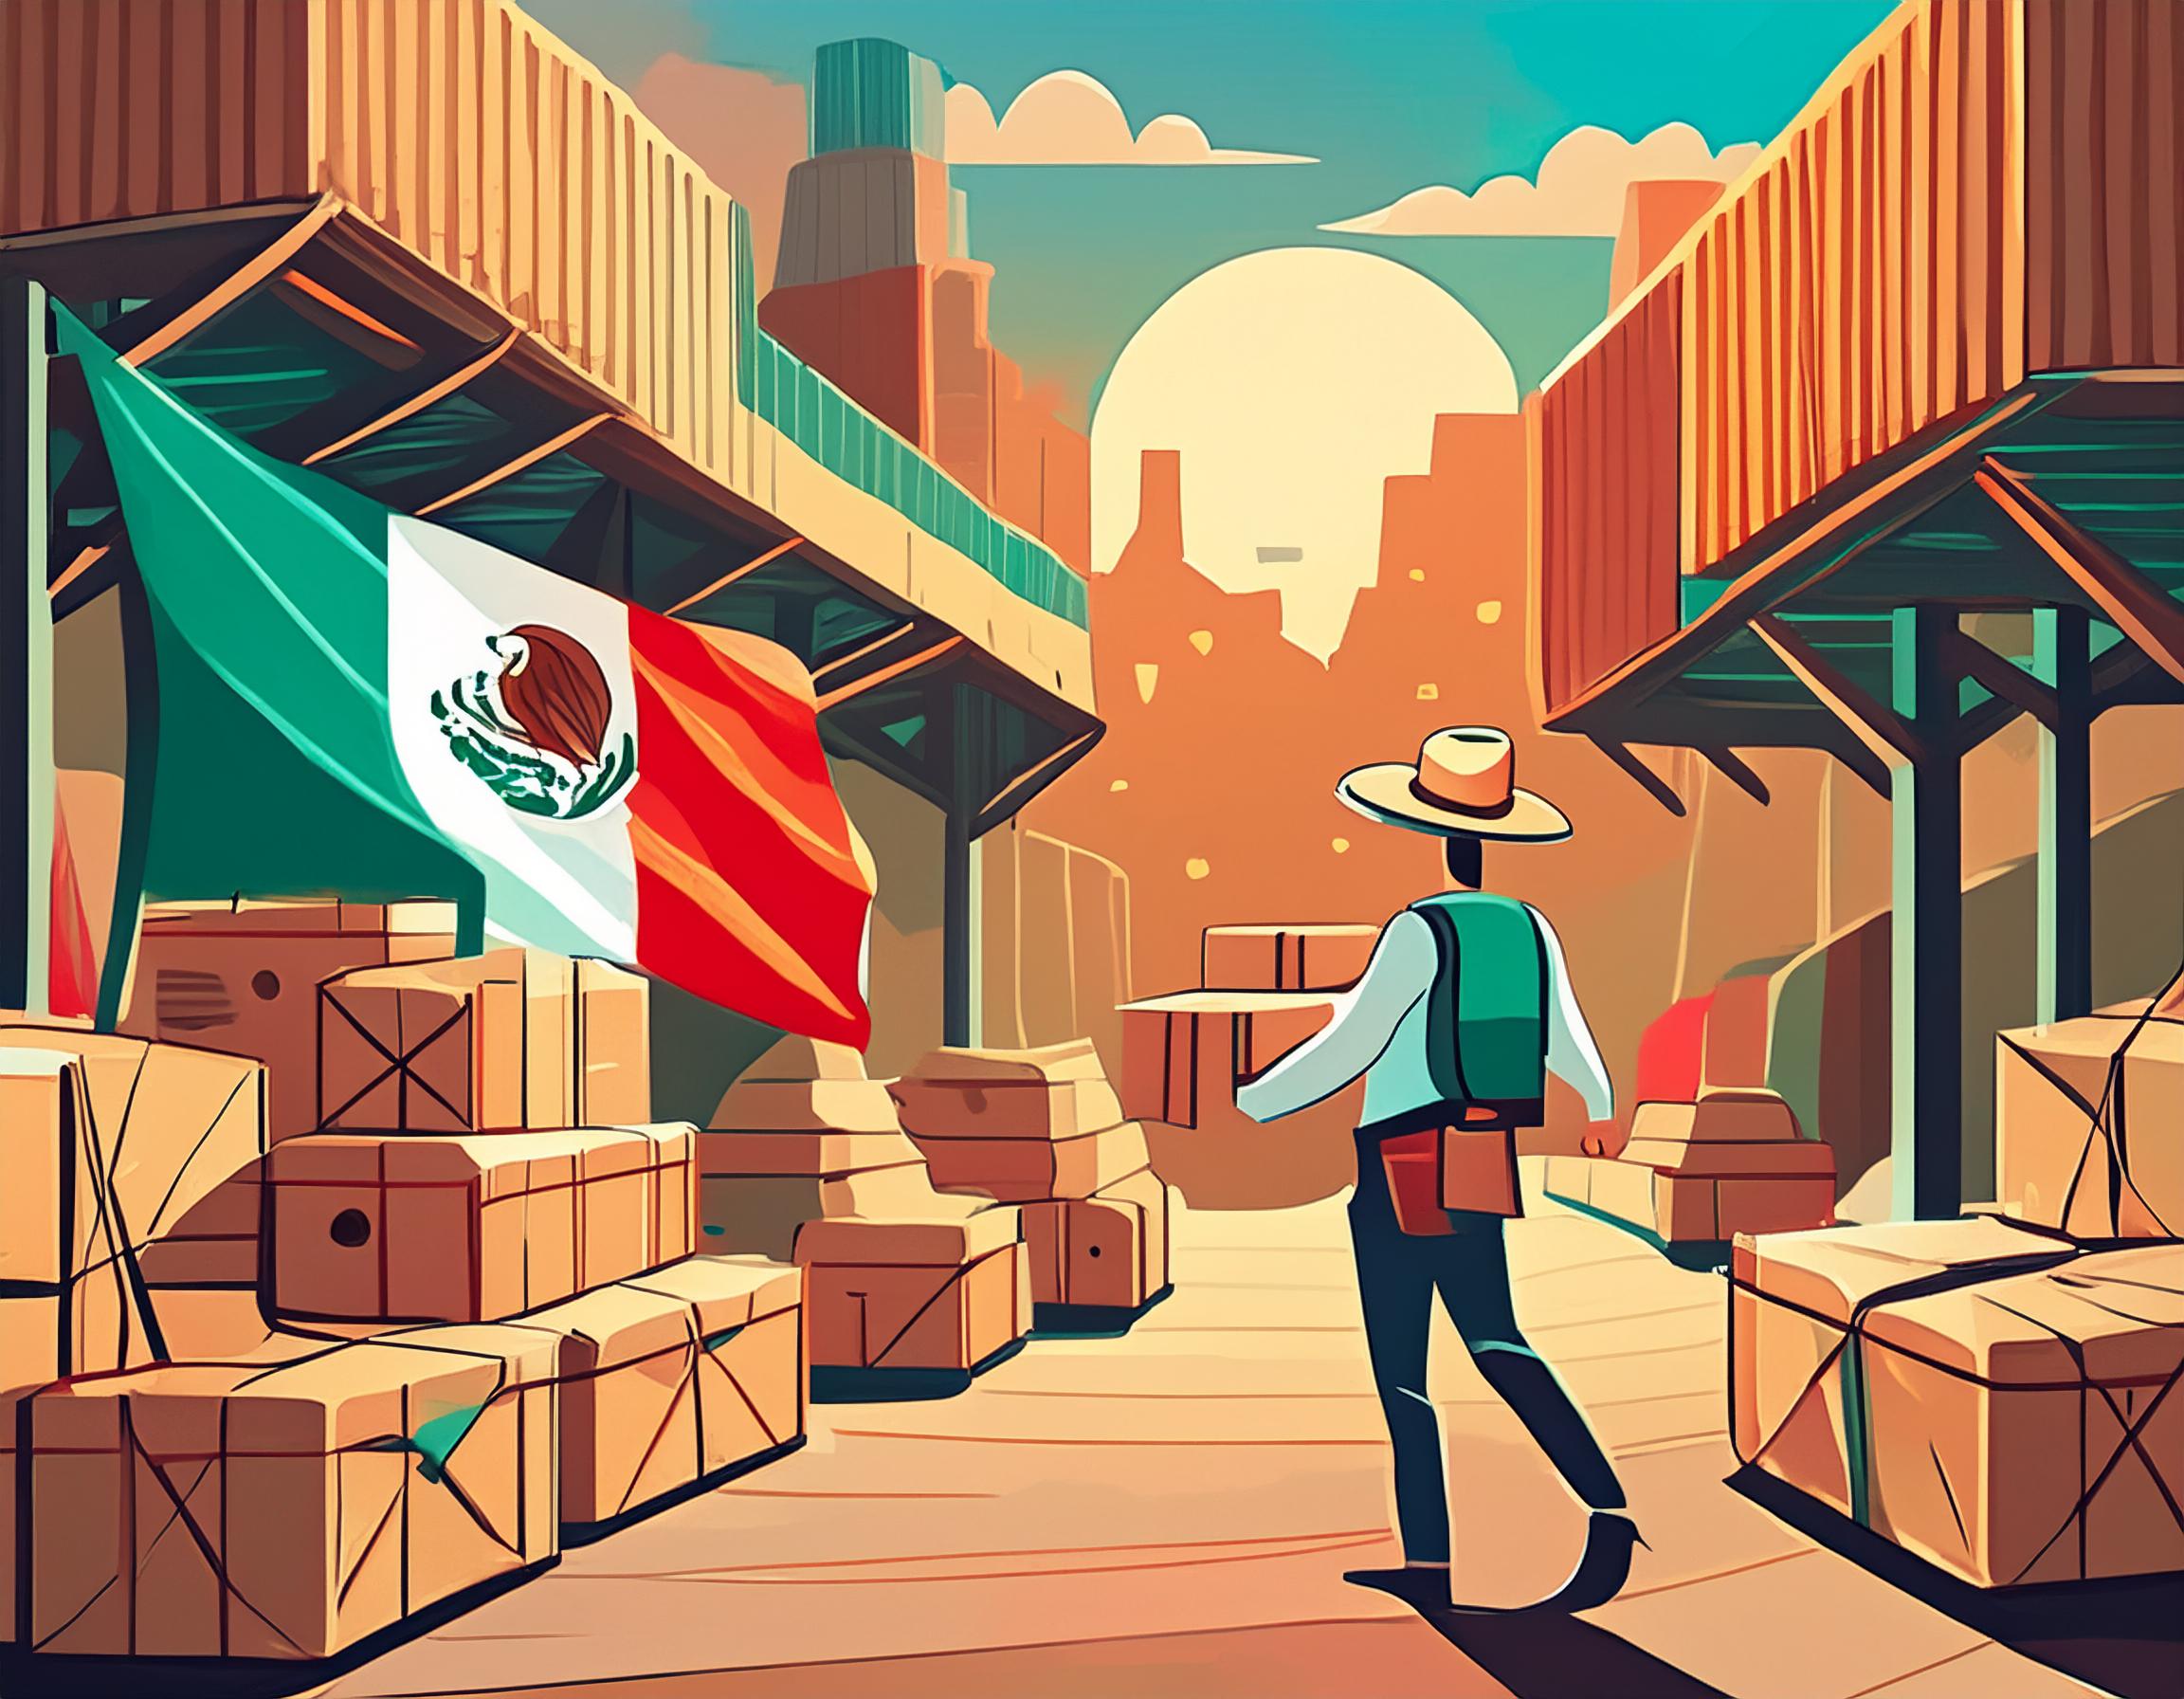 Colorful parcels adorned with Mexican motifs, representing seamless parcel forwarding from Mexico.